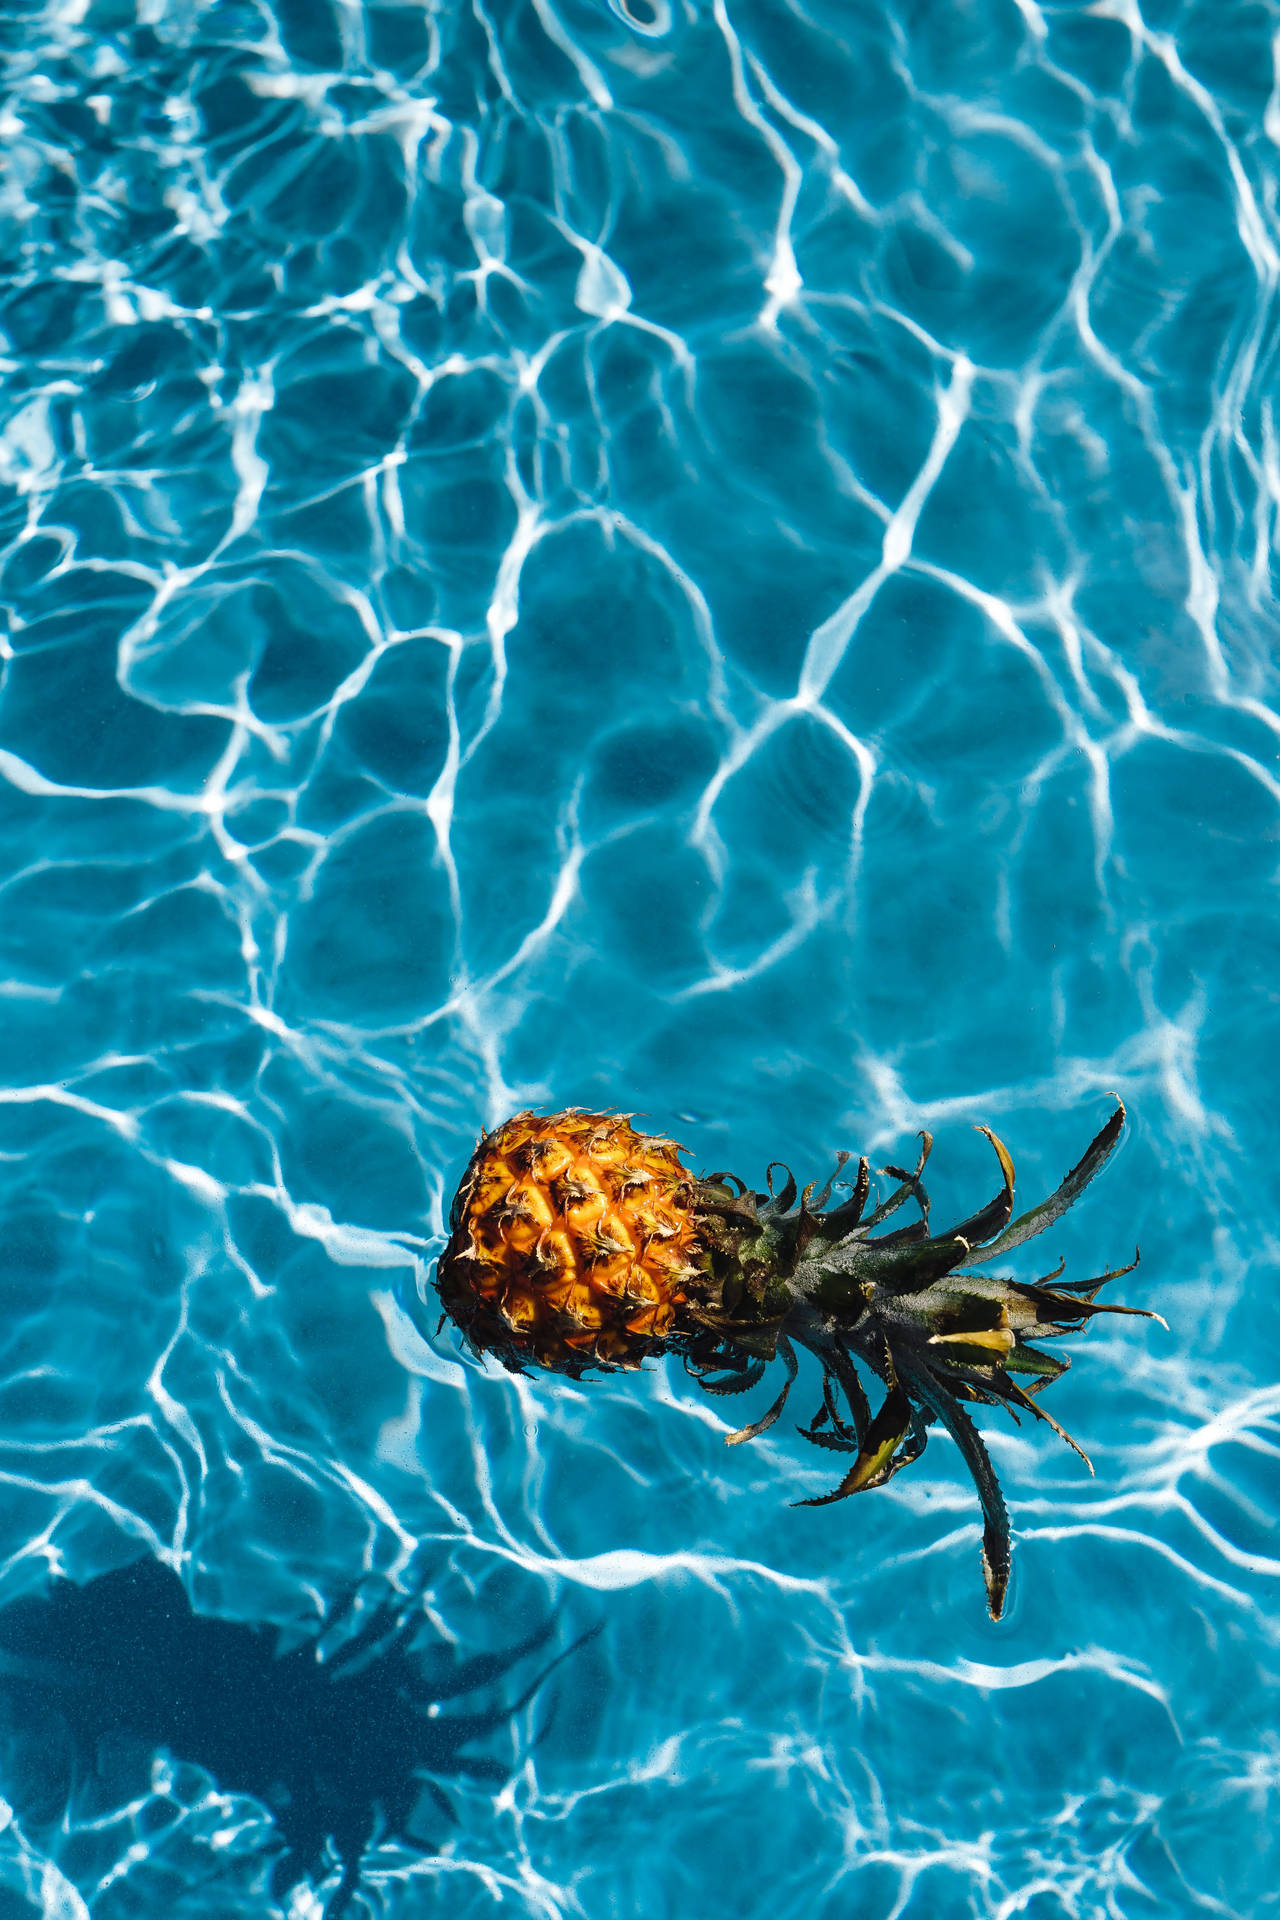 Take A Dive Into Relaxation With This Pineapple In The Pool. Background